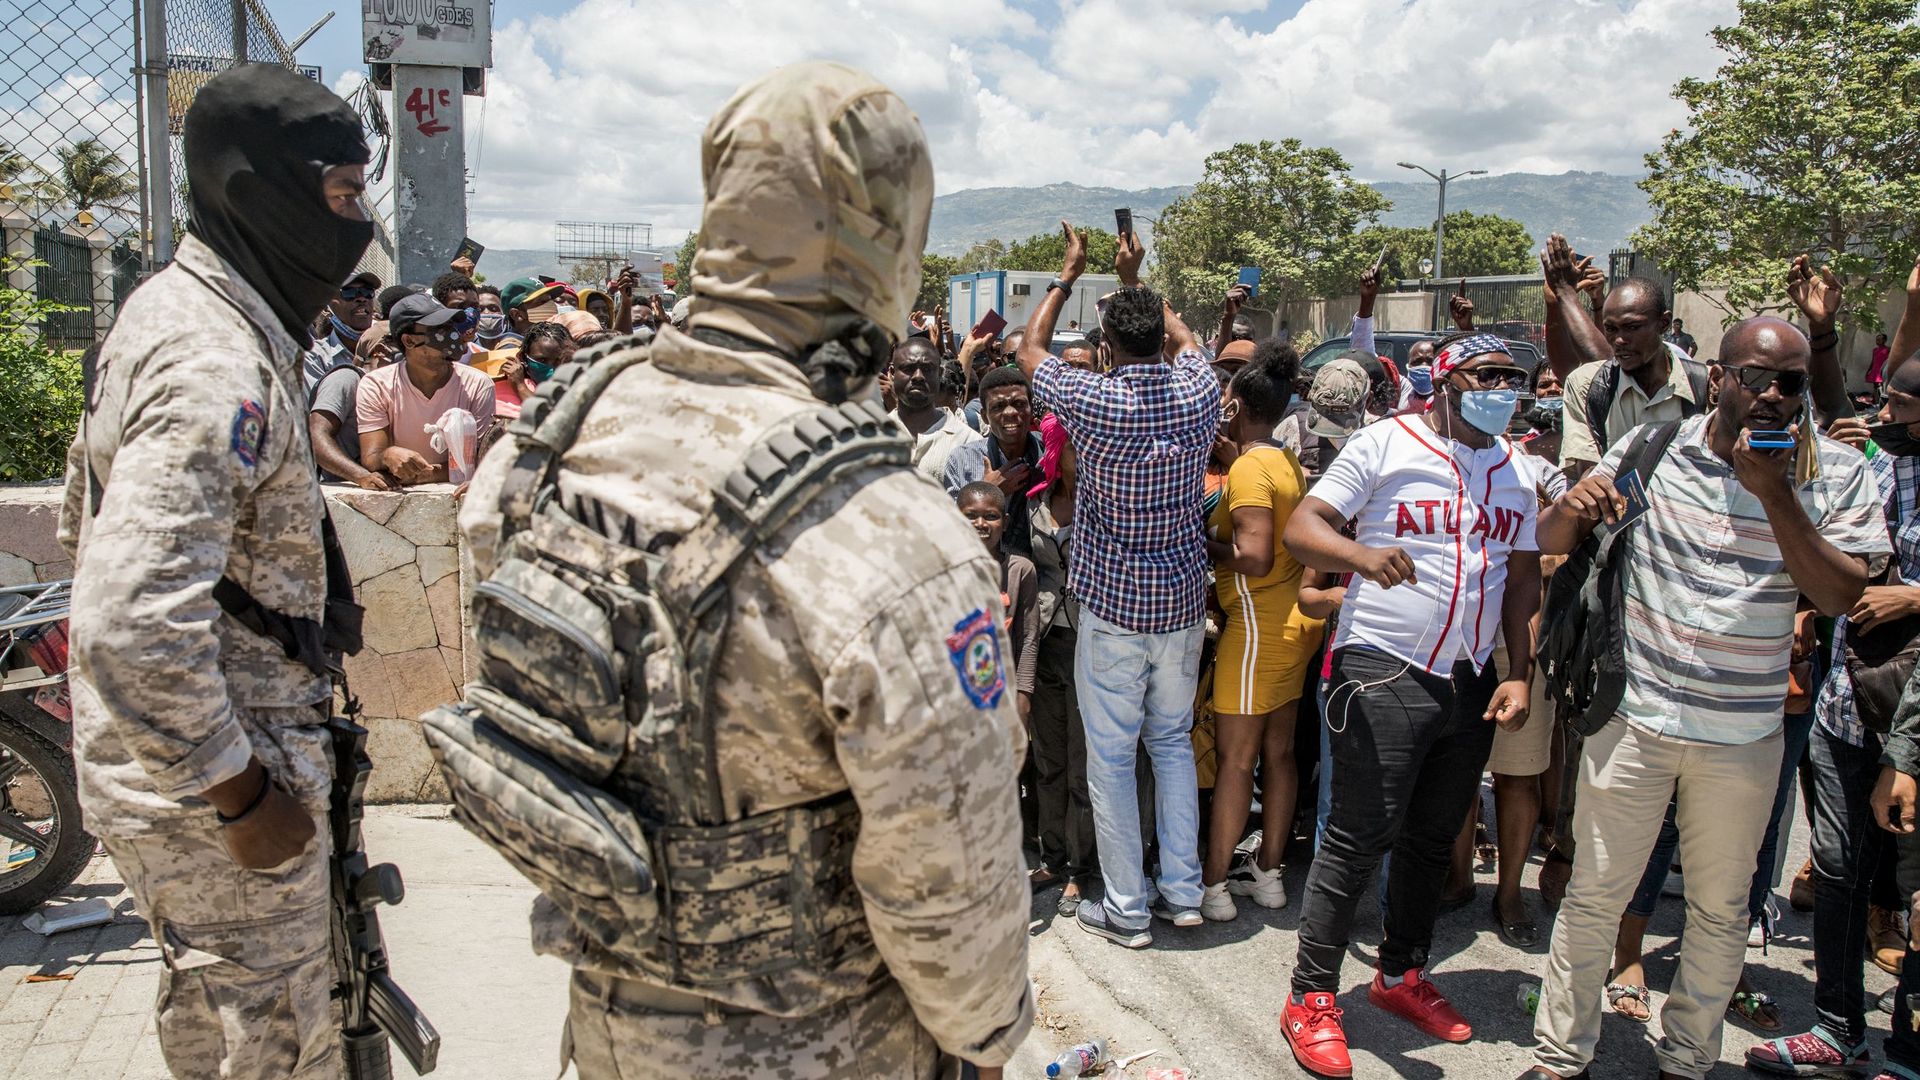  Police look on as Haitian citizens gather in front of the US Embassy in Tabarre, Haiti on July 10